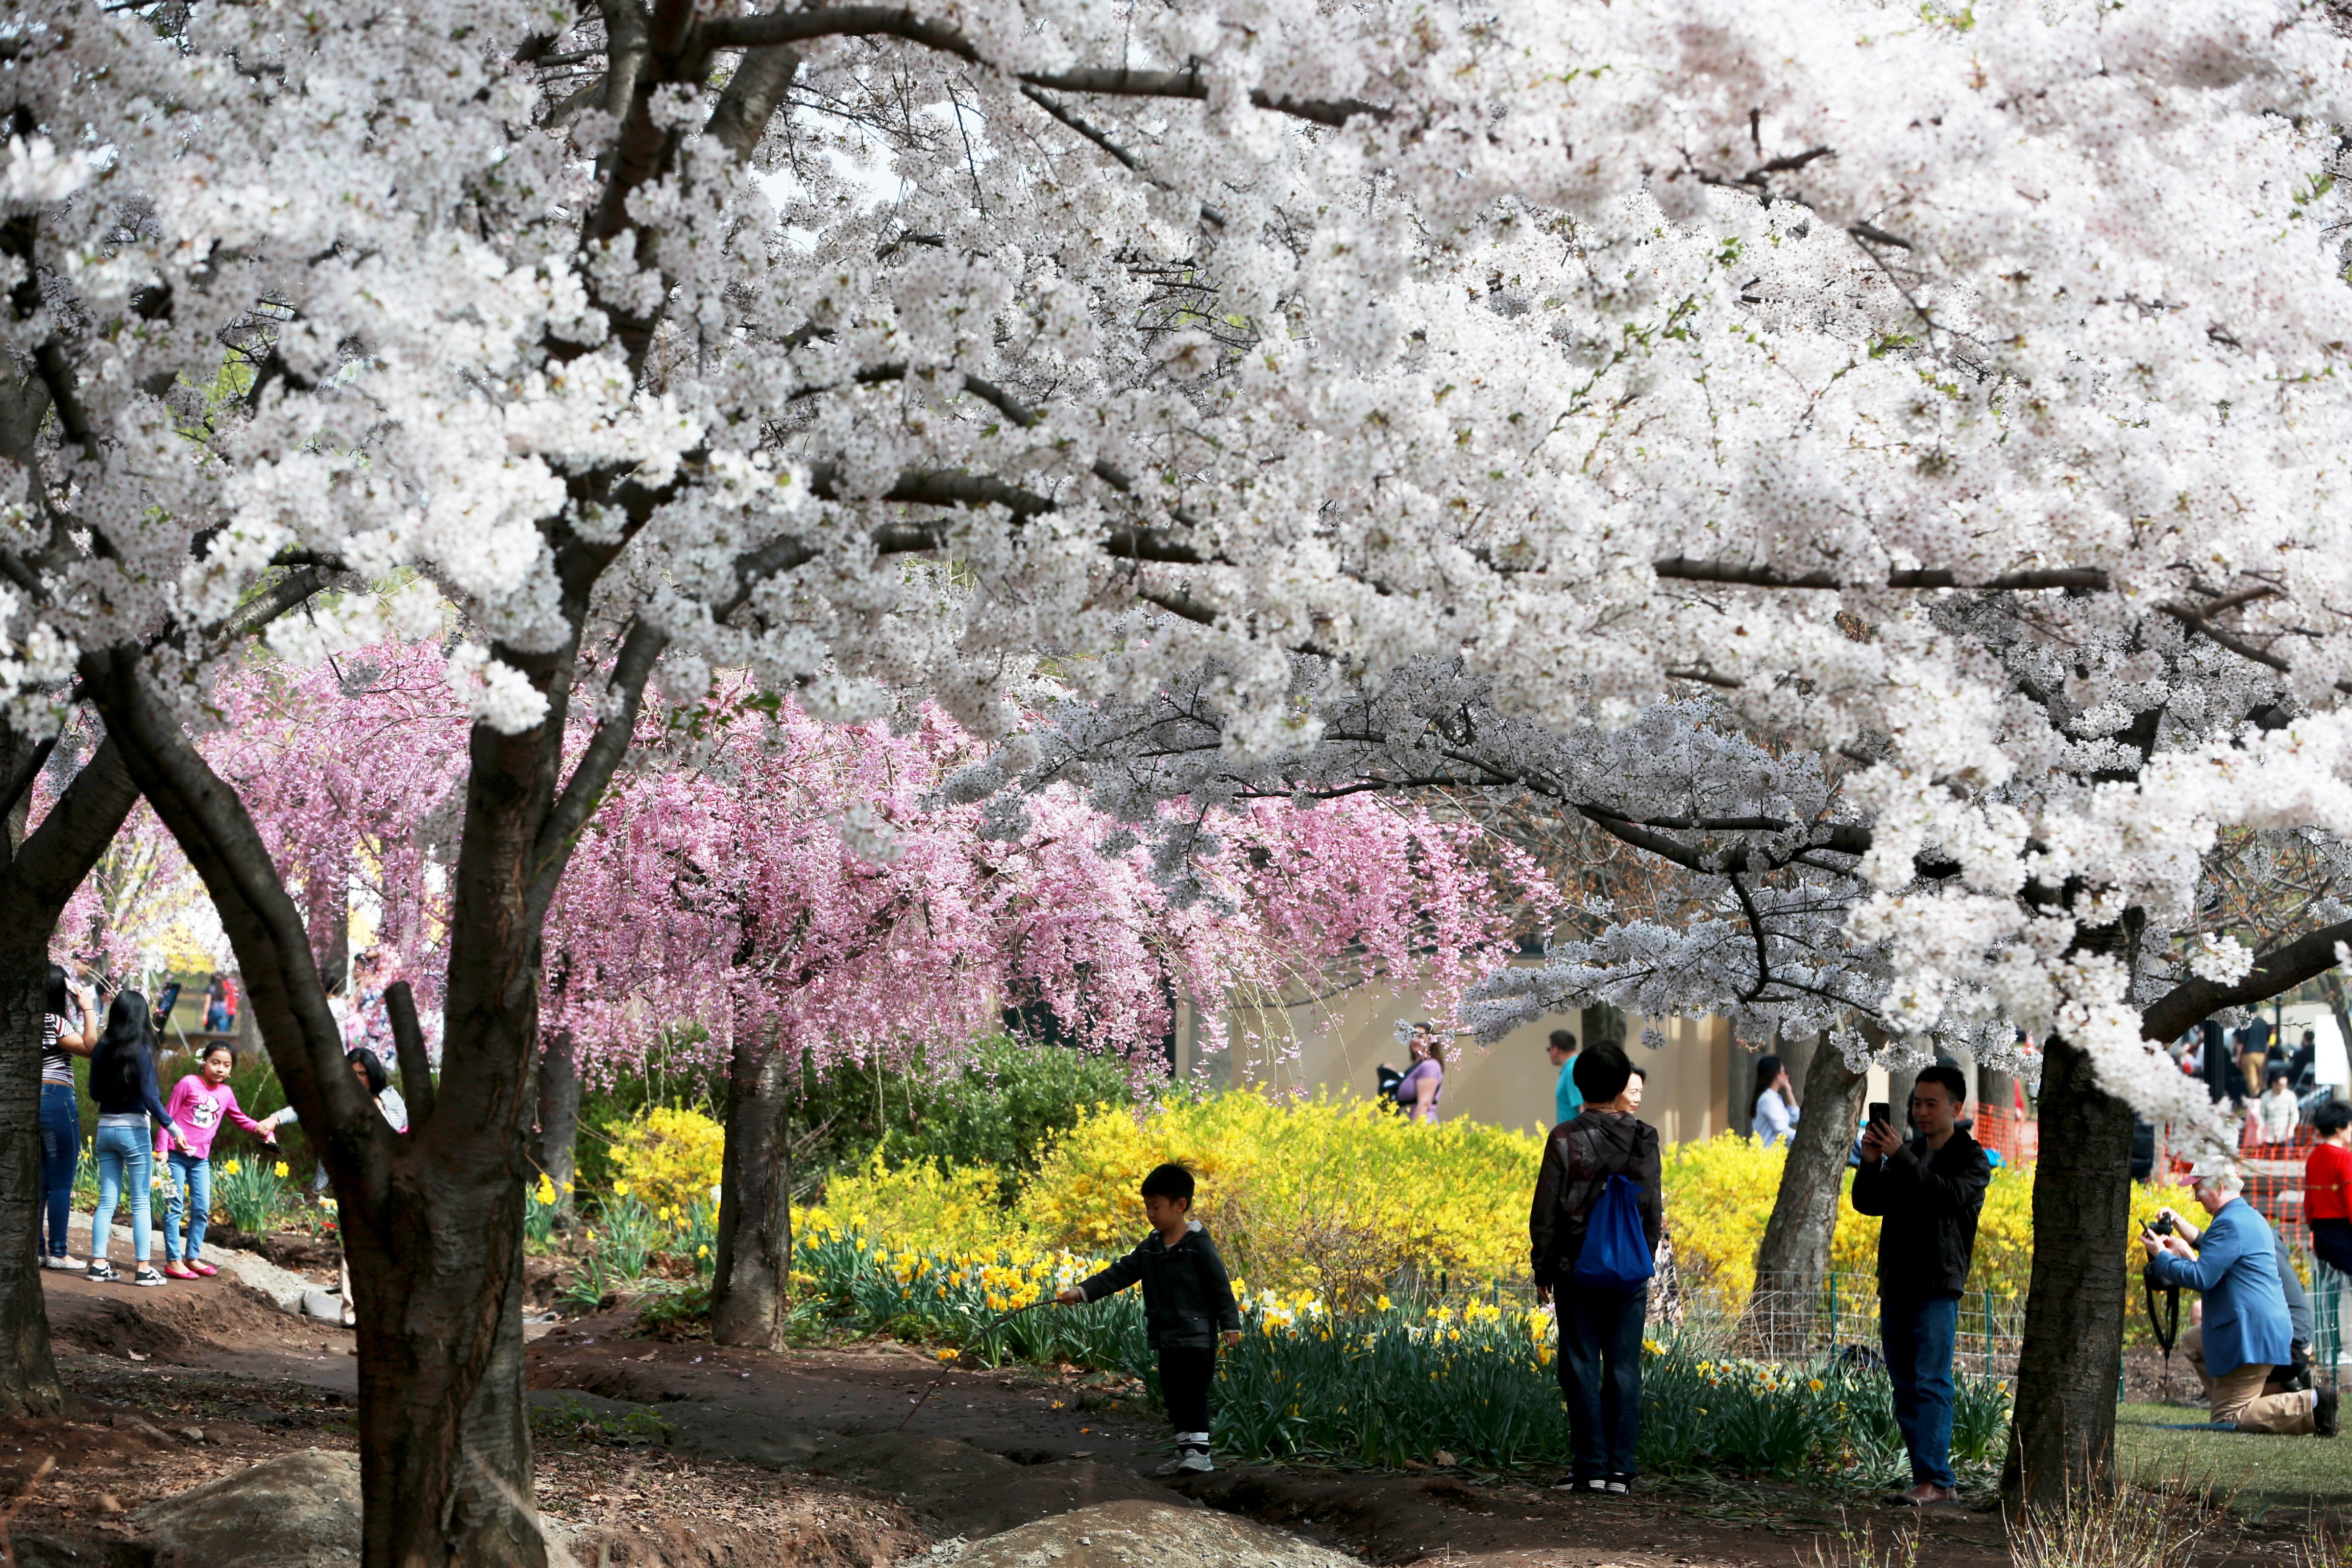 Places to see cherry blossoms near Jersey City NJ